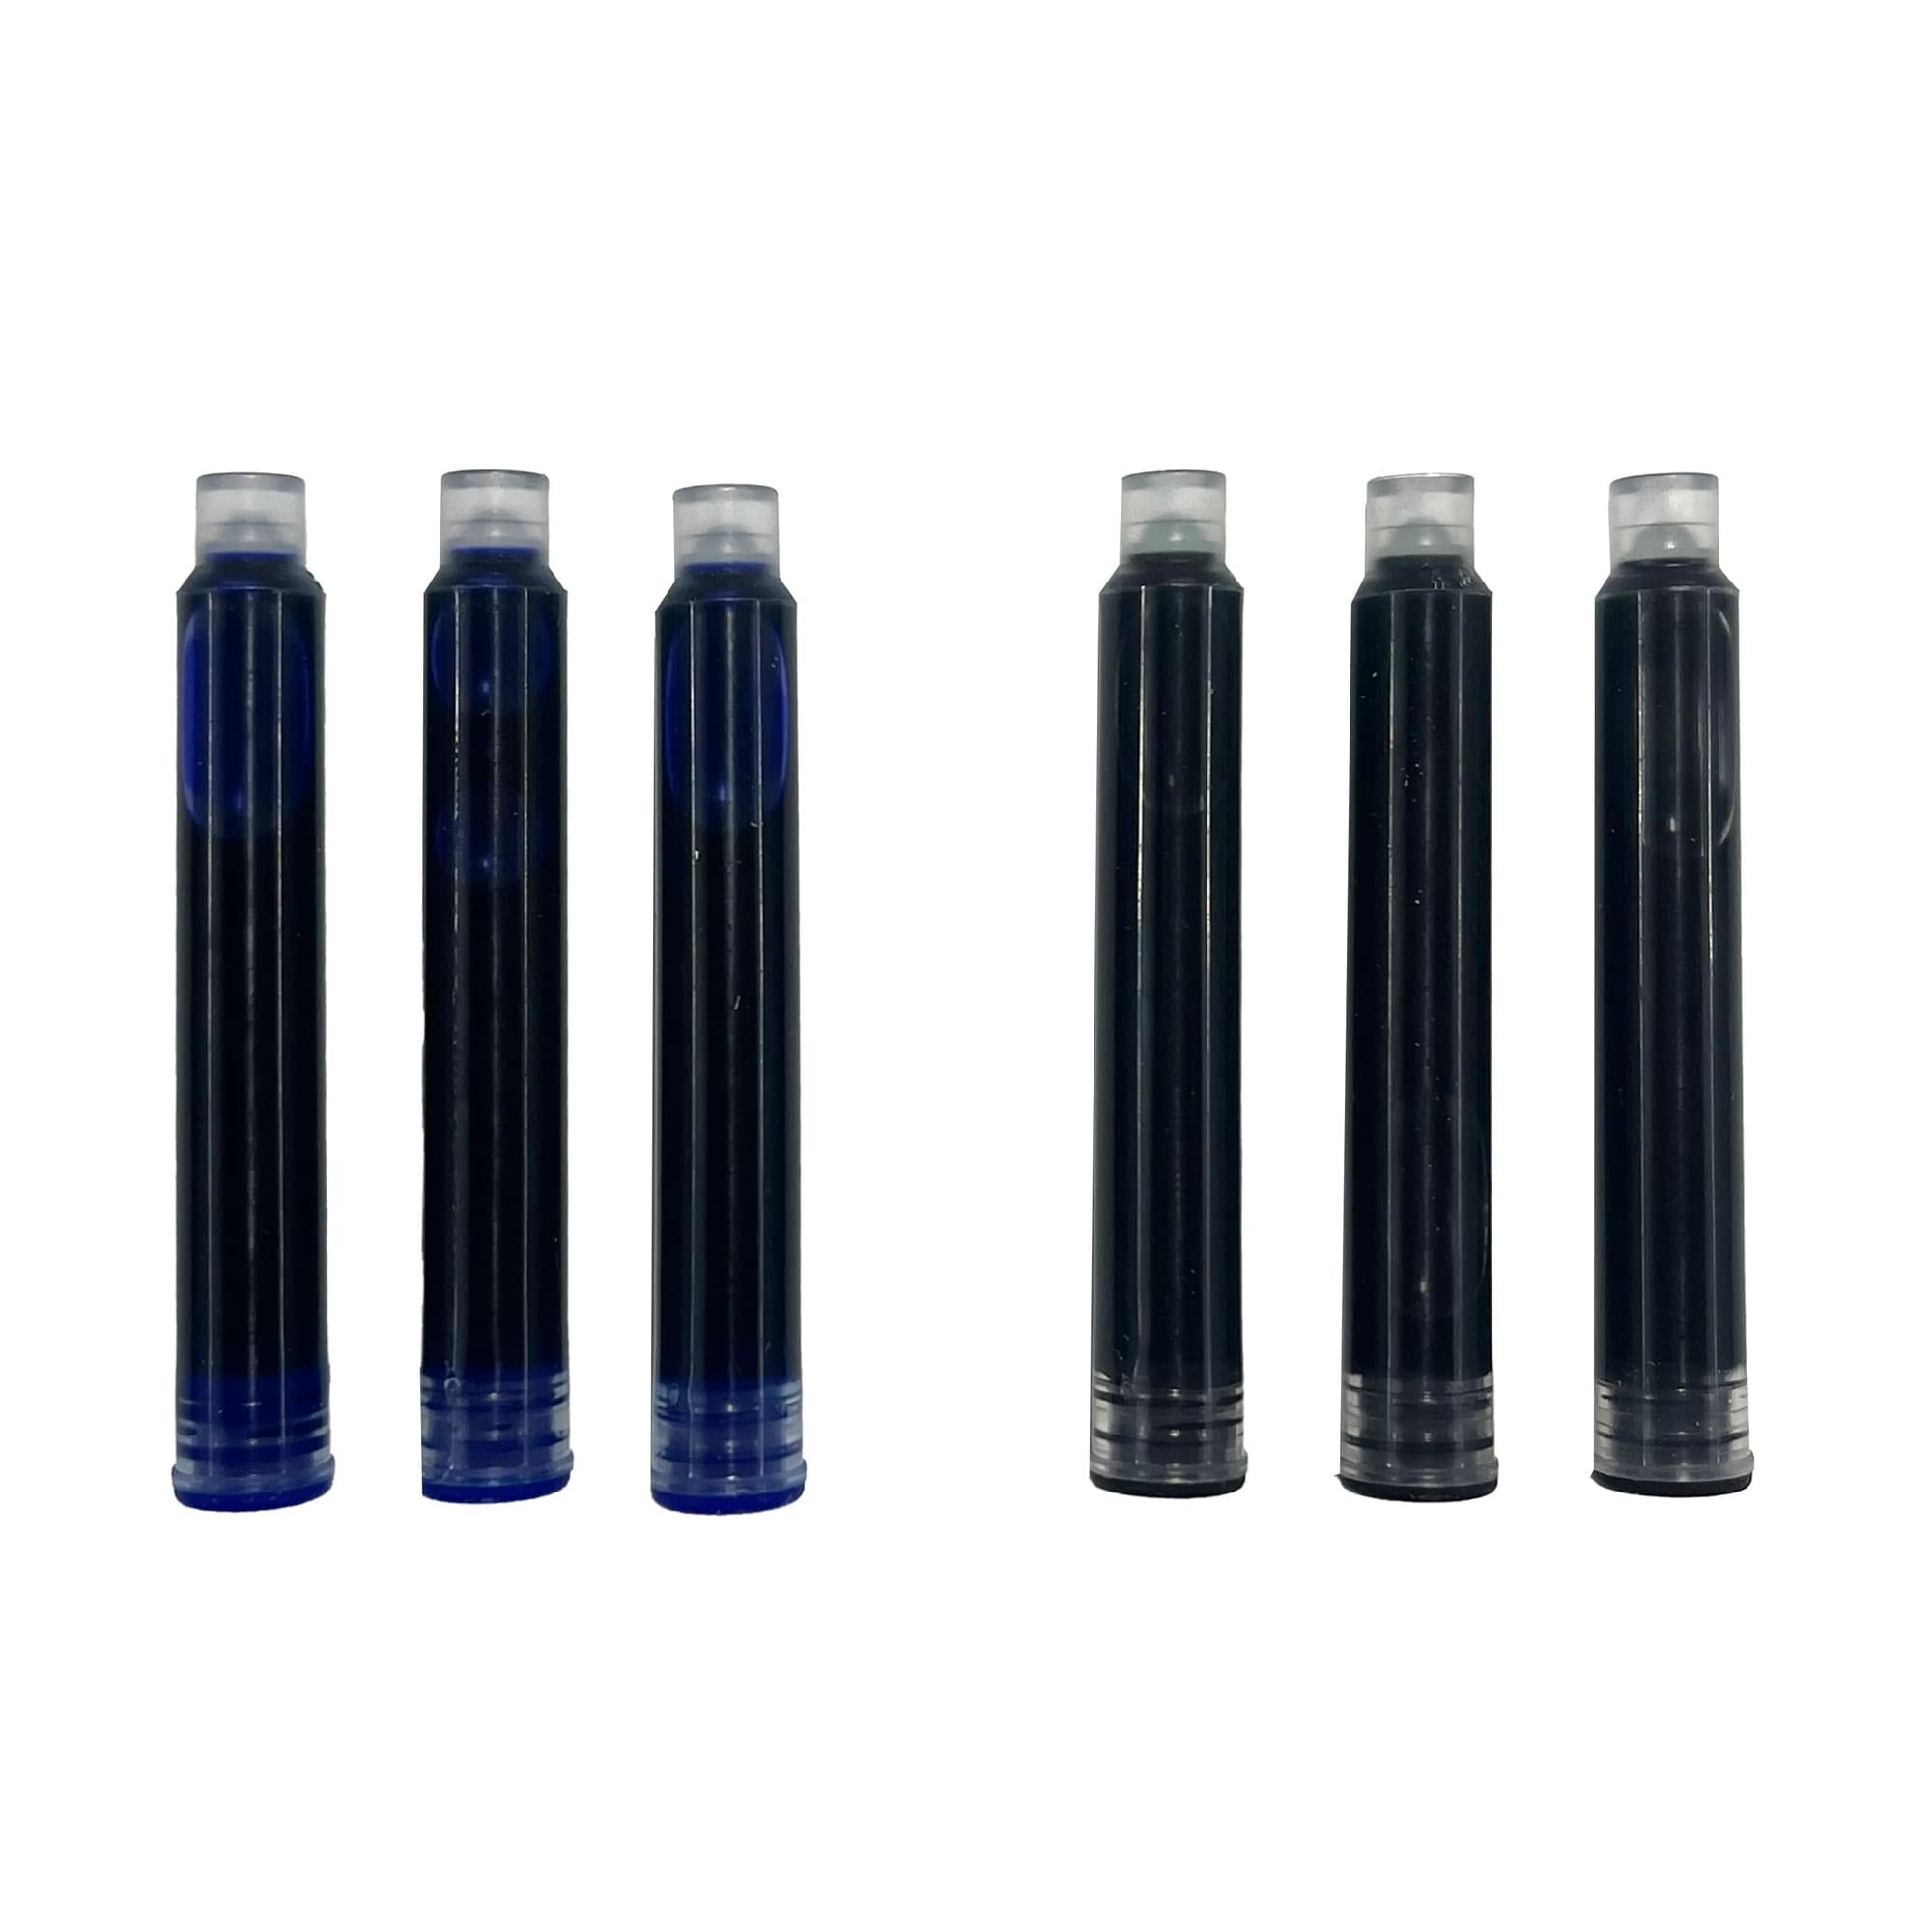 6 refills for the OOLY Splendid Duo Fountain Pens 3 Black & 3 Blue Ink Cartridges